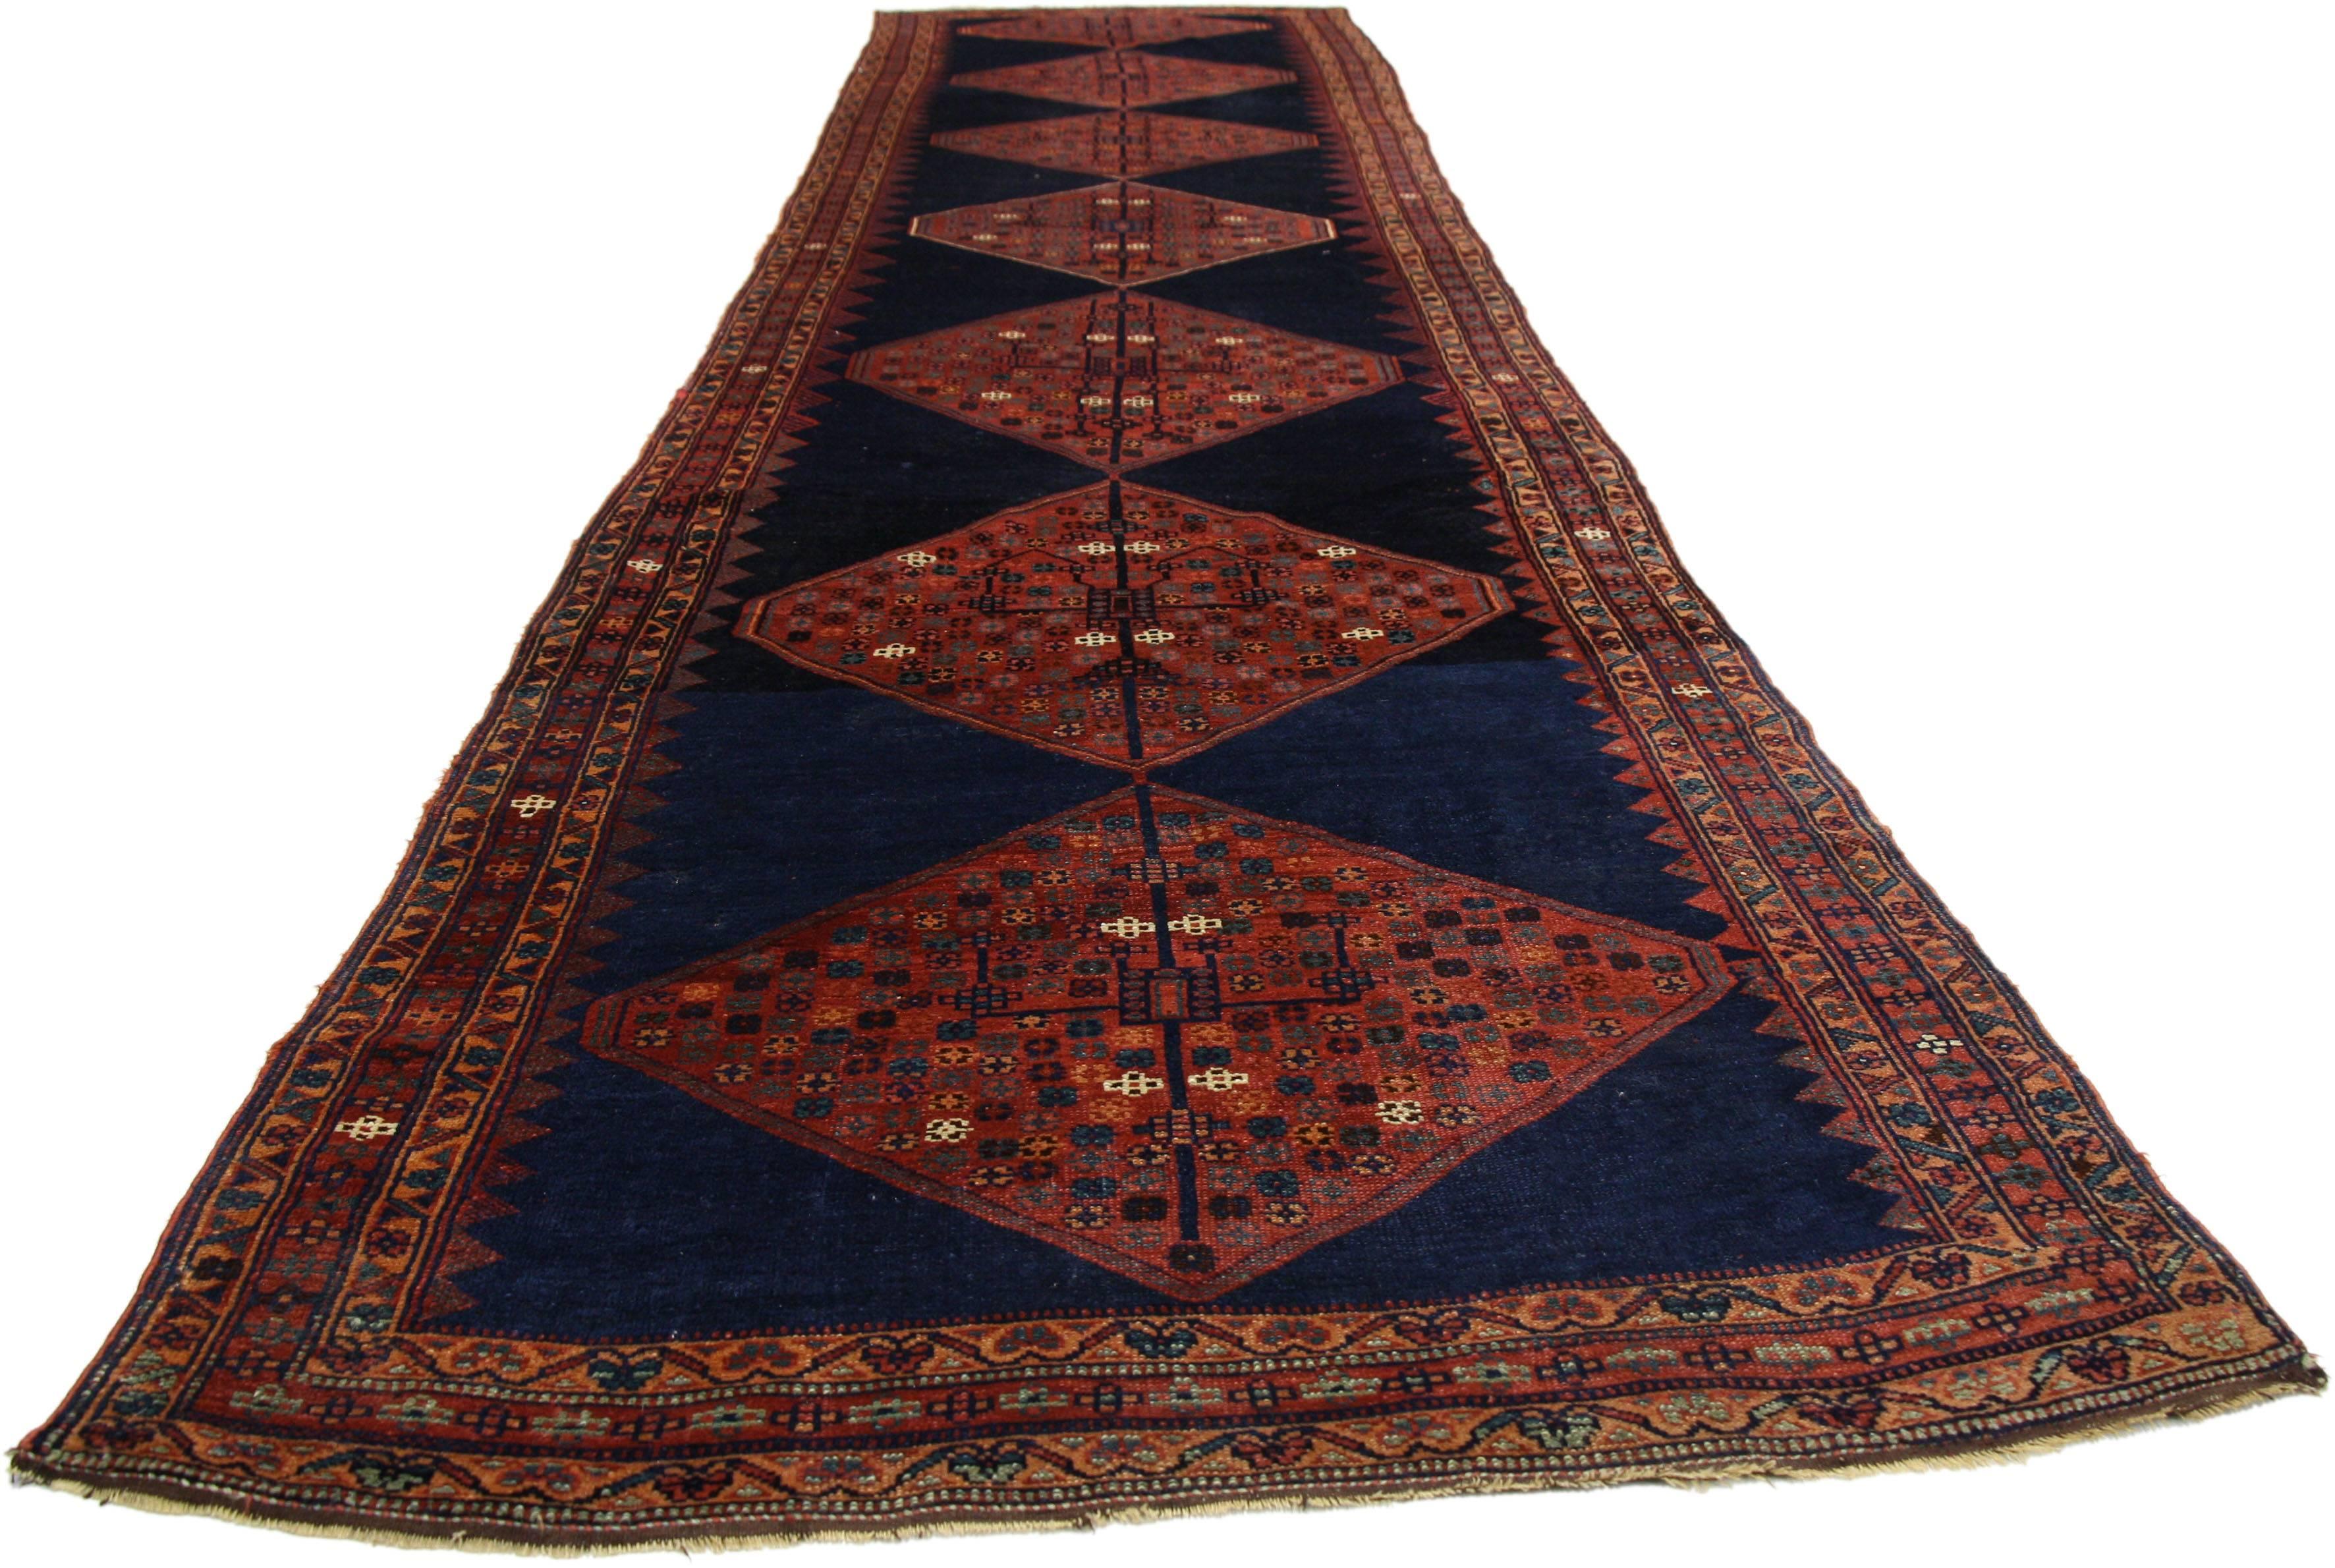 77151, antique Persian Kurdish runner, extra-long hallway runner. This hand knotted antique Persian Kurdish runner features seven diamond shaped lozenges on an abrashed ink blue field. Frenzied gardens of stylized flowers fill the stacked lozenge